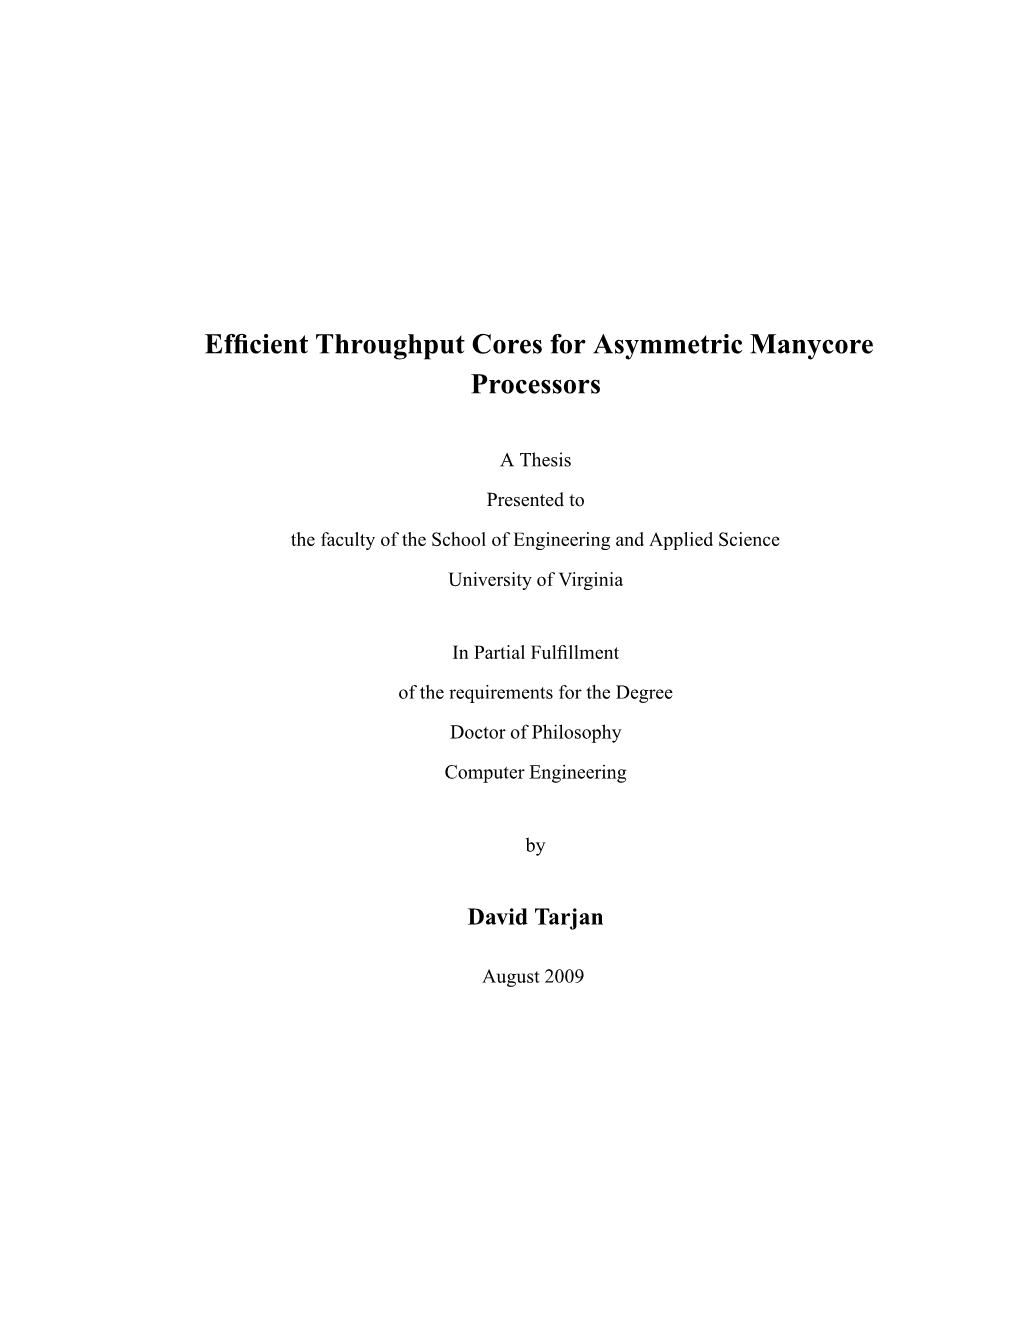 Efficient Throughput Cores for Asymmetric Manycore Processors